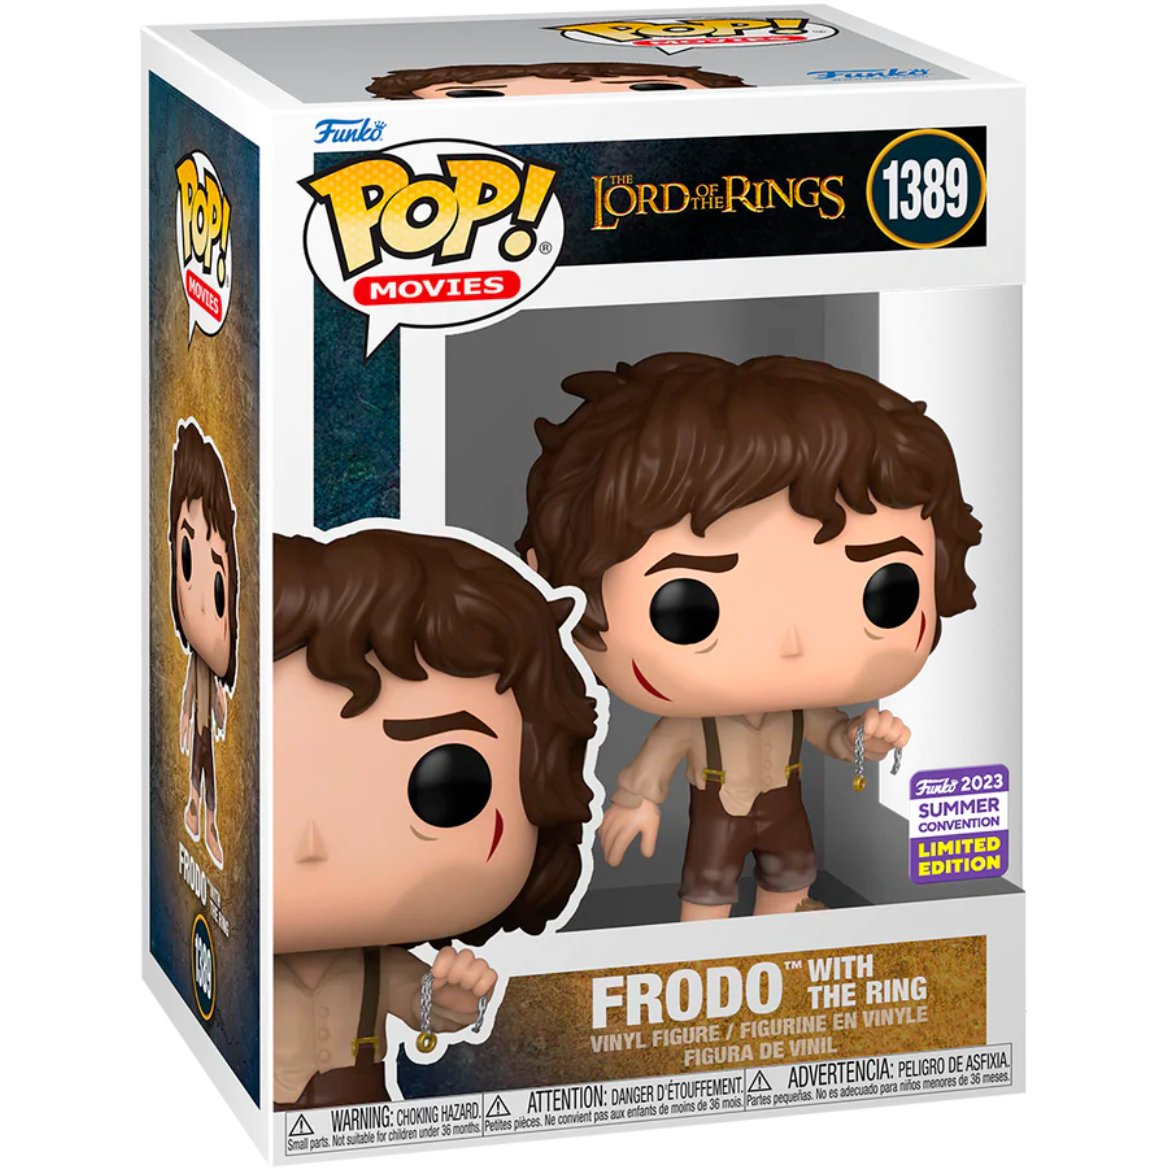 The Lord of the Rings - Frodo with the Ring (2023 Summer Convention Limited Edition) #1389 - Funko Pop! Vinyl Movies - Persona Toys